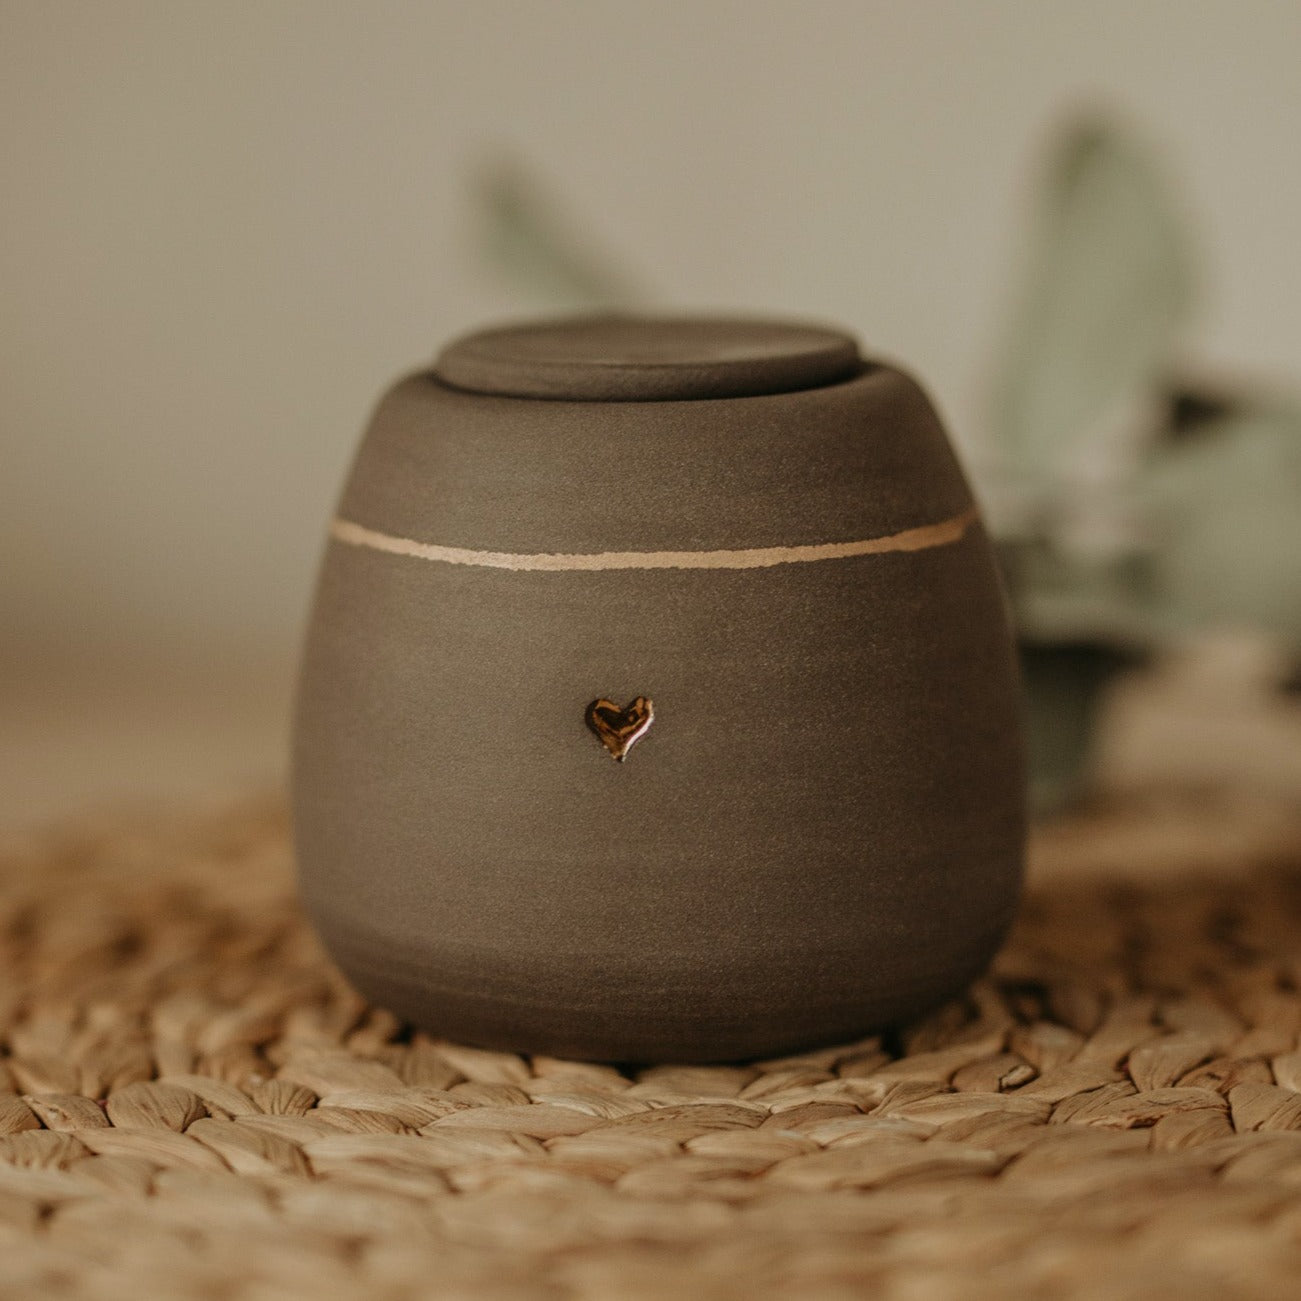 Customizable gray stoneware pet memorial urn - adorned with gold accent - cherished remembrance for your loyal companion.